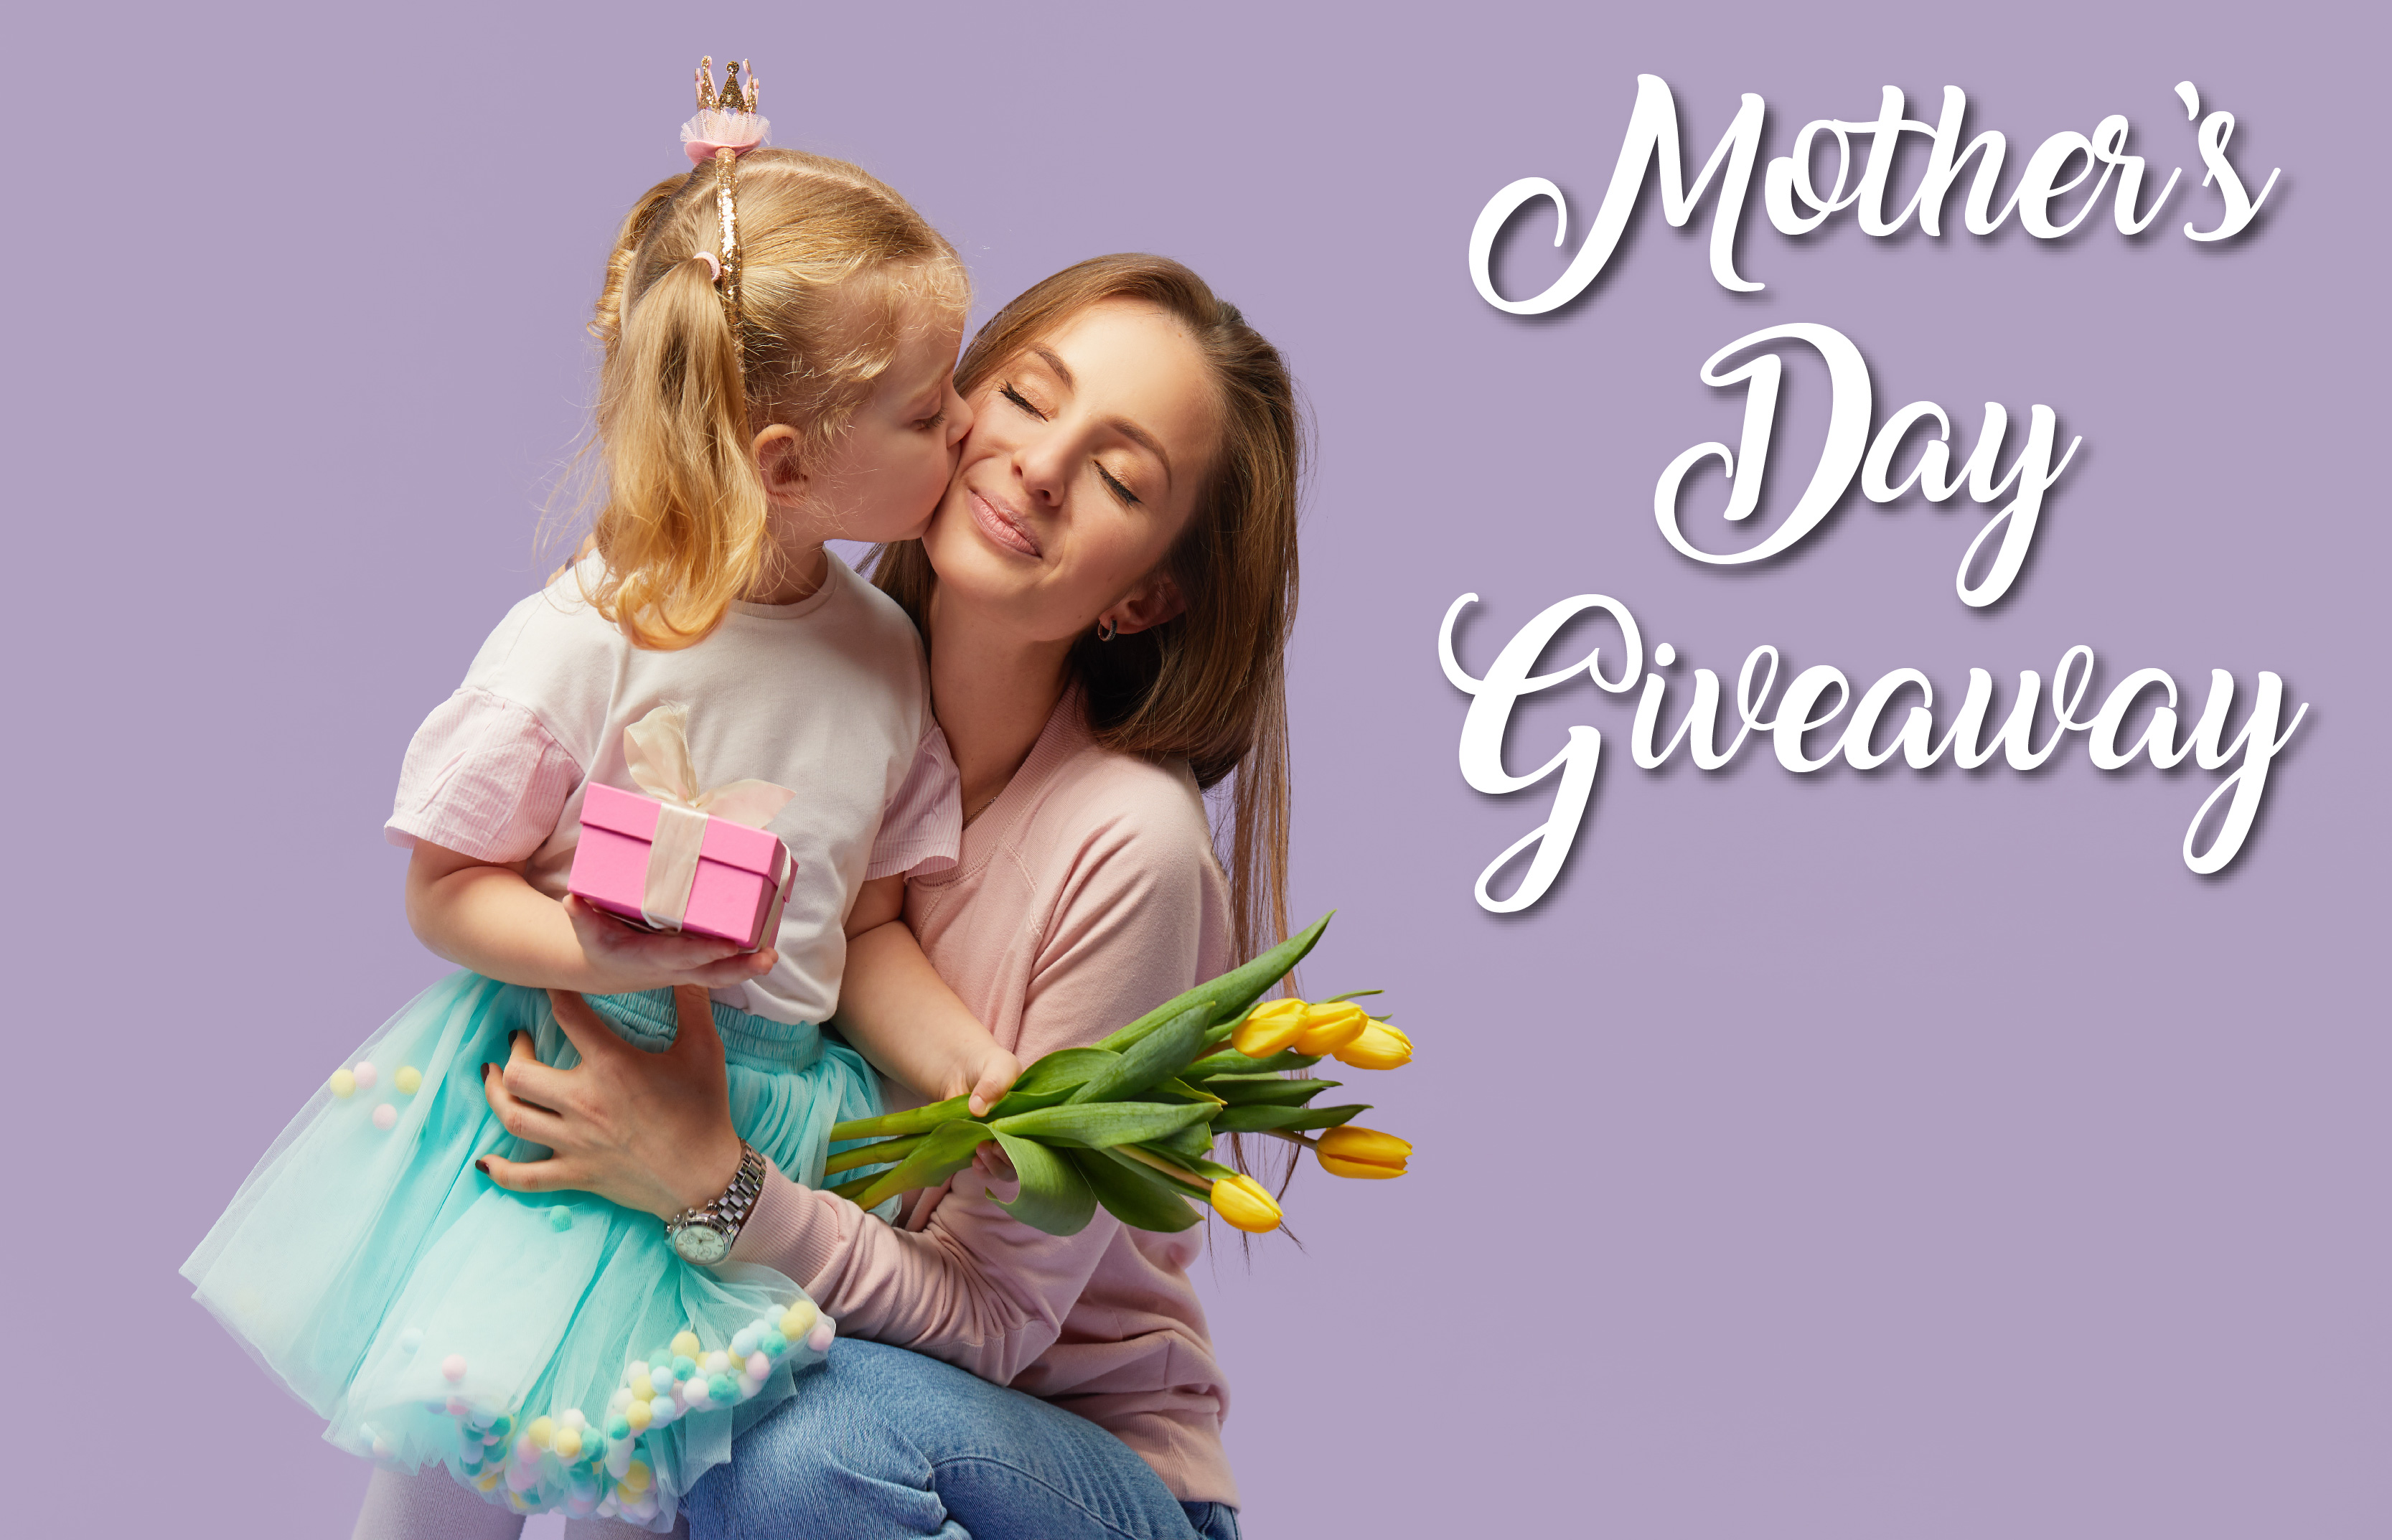 Cinco Ranch II Announces Mother's Day Giveaway